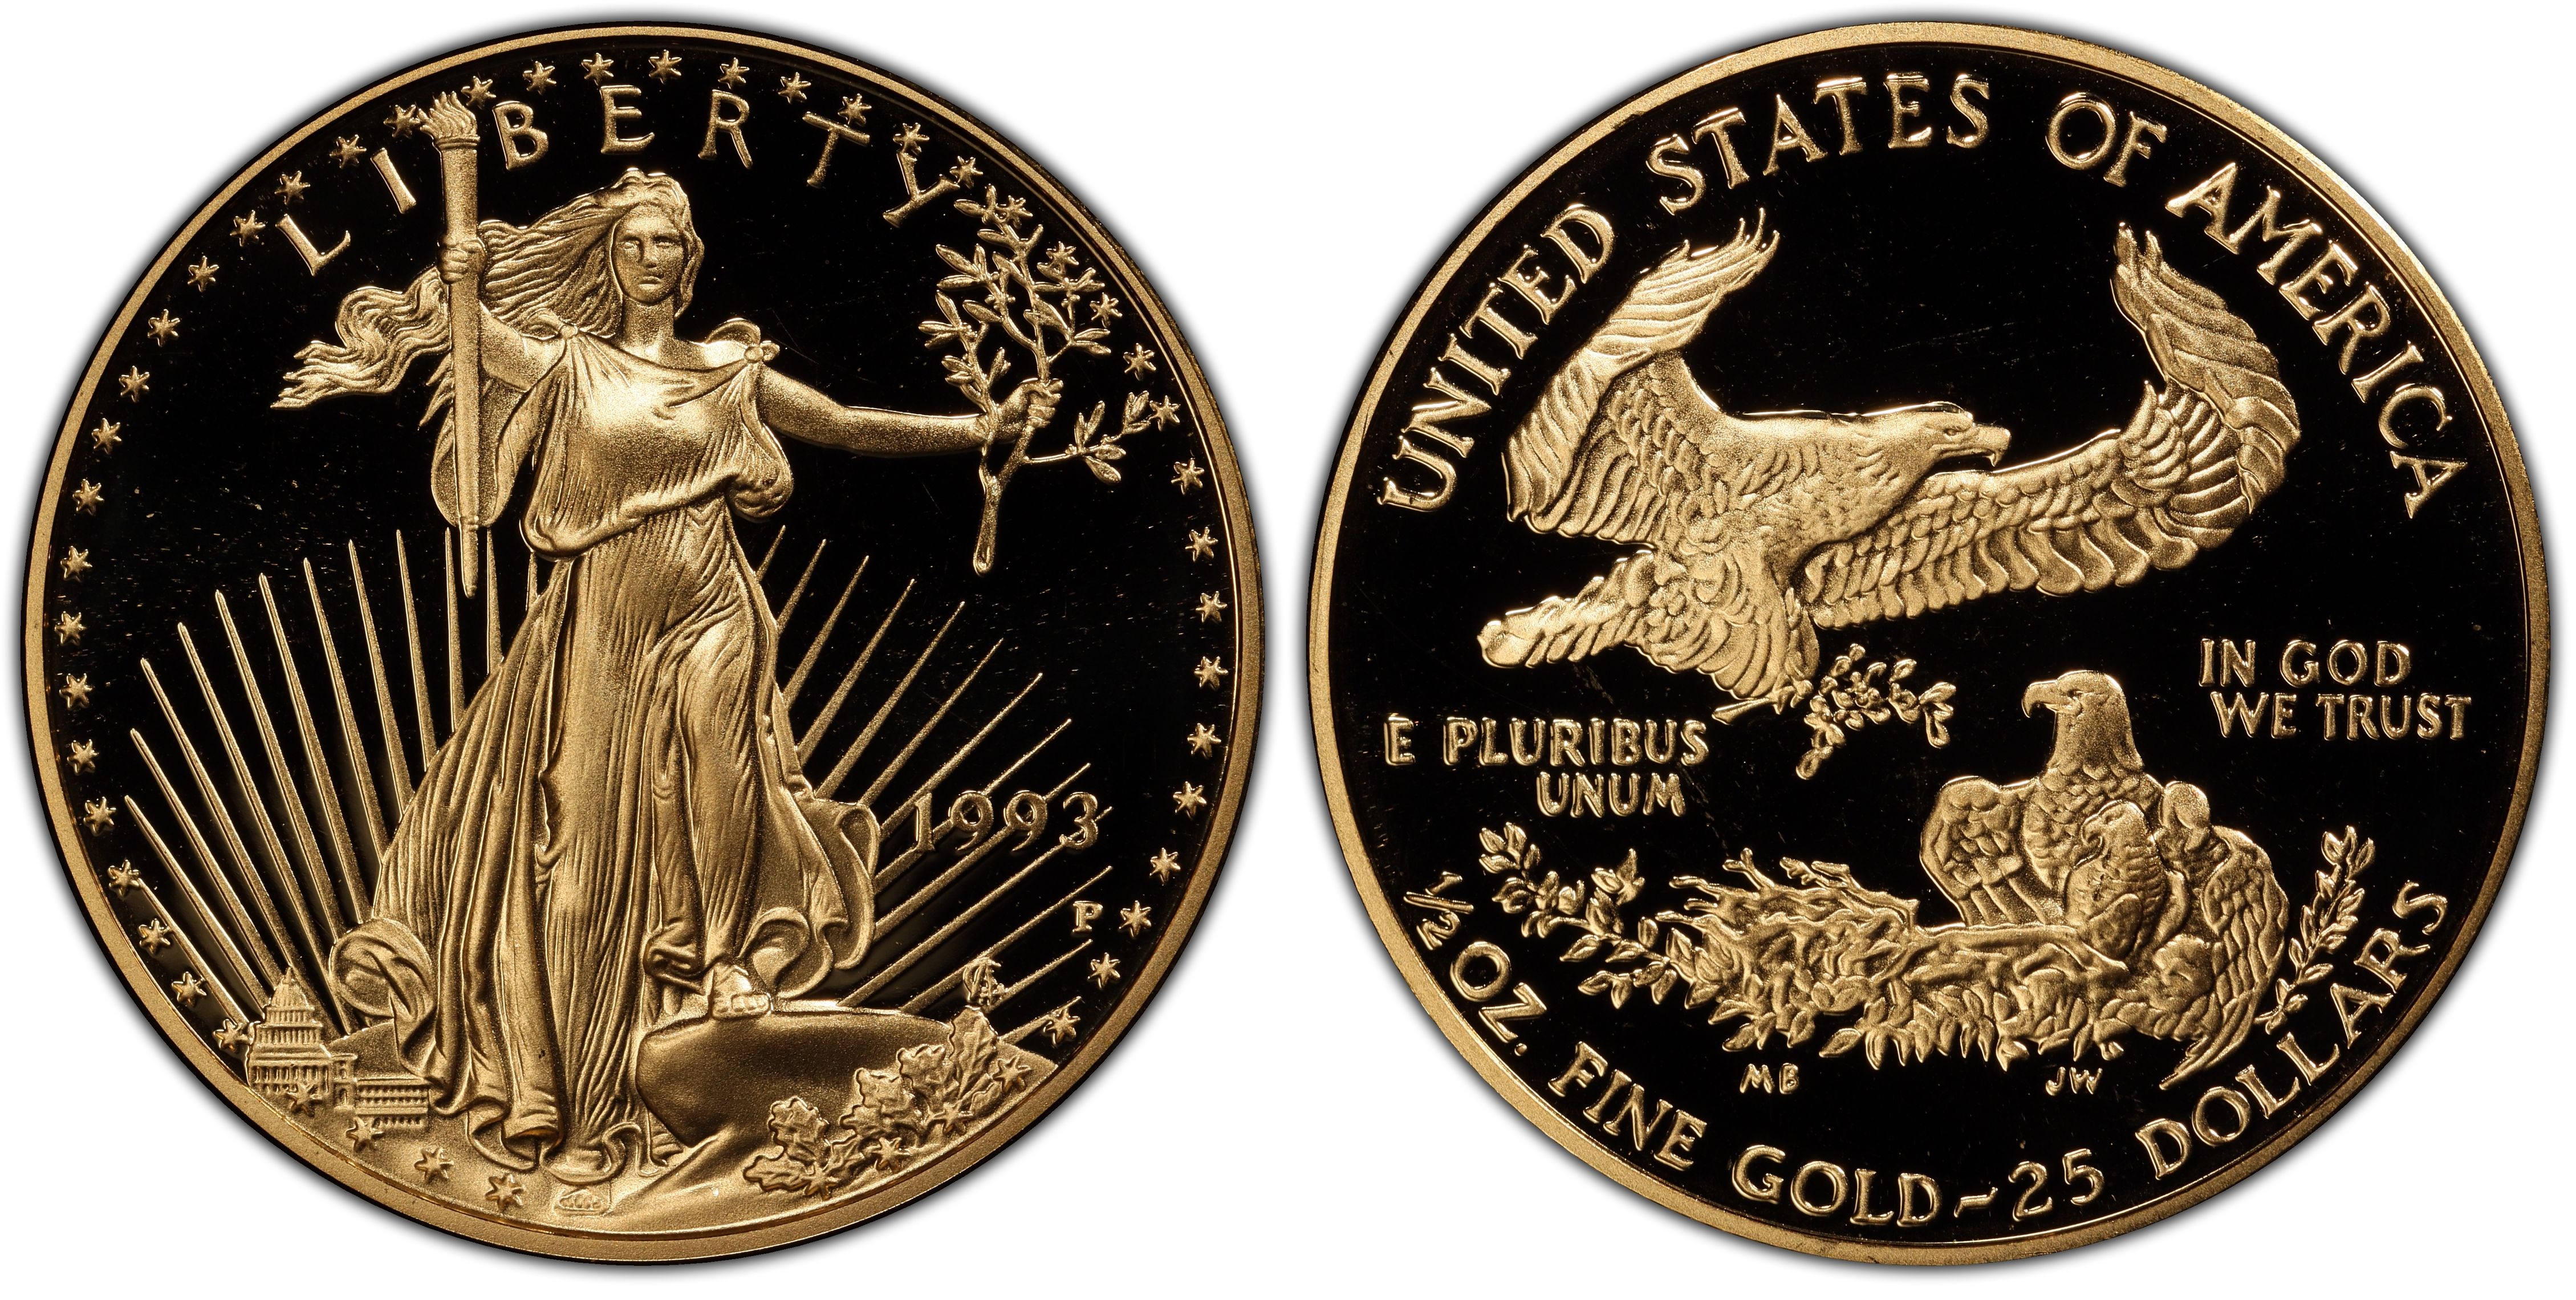 1993-P $25 Gold Eagle, DCAM (Proof) Gold Eagles - PCGS CoinFacts